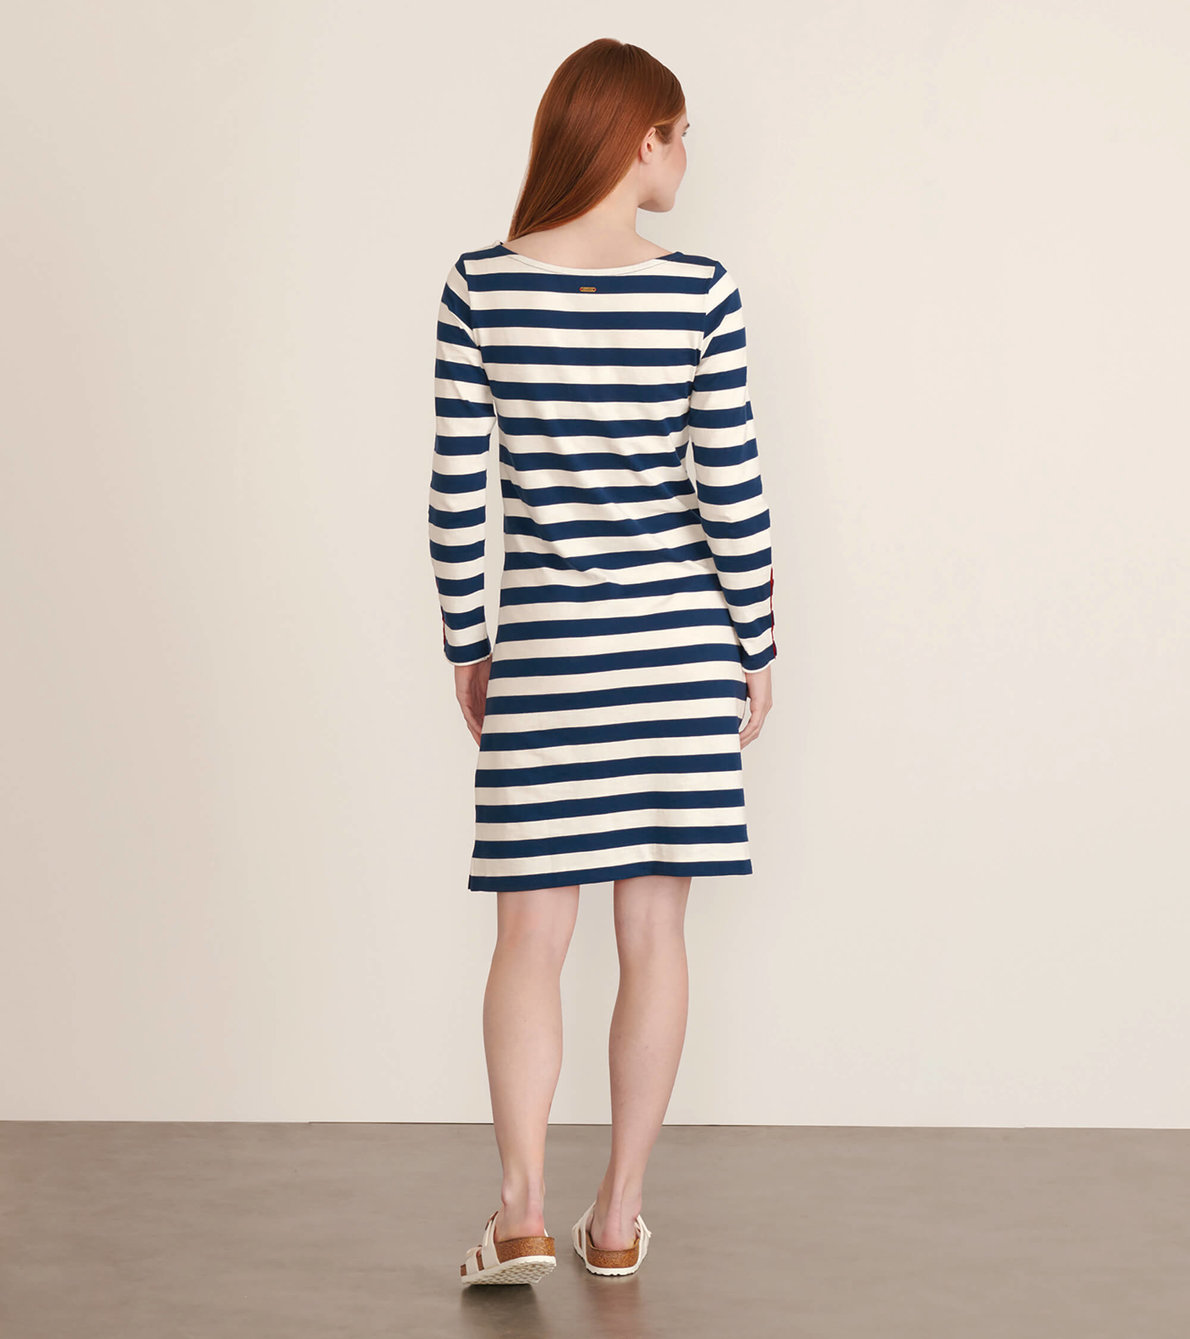 View larger image of Zoe Dress - Copen Navy Stripes